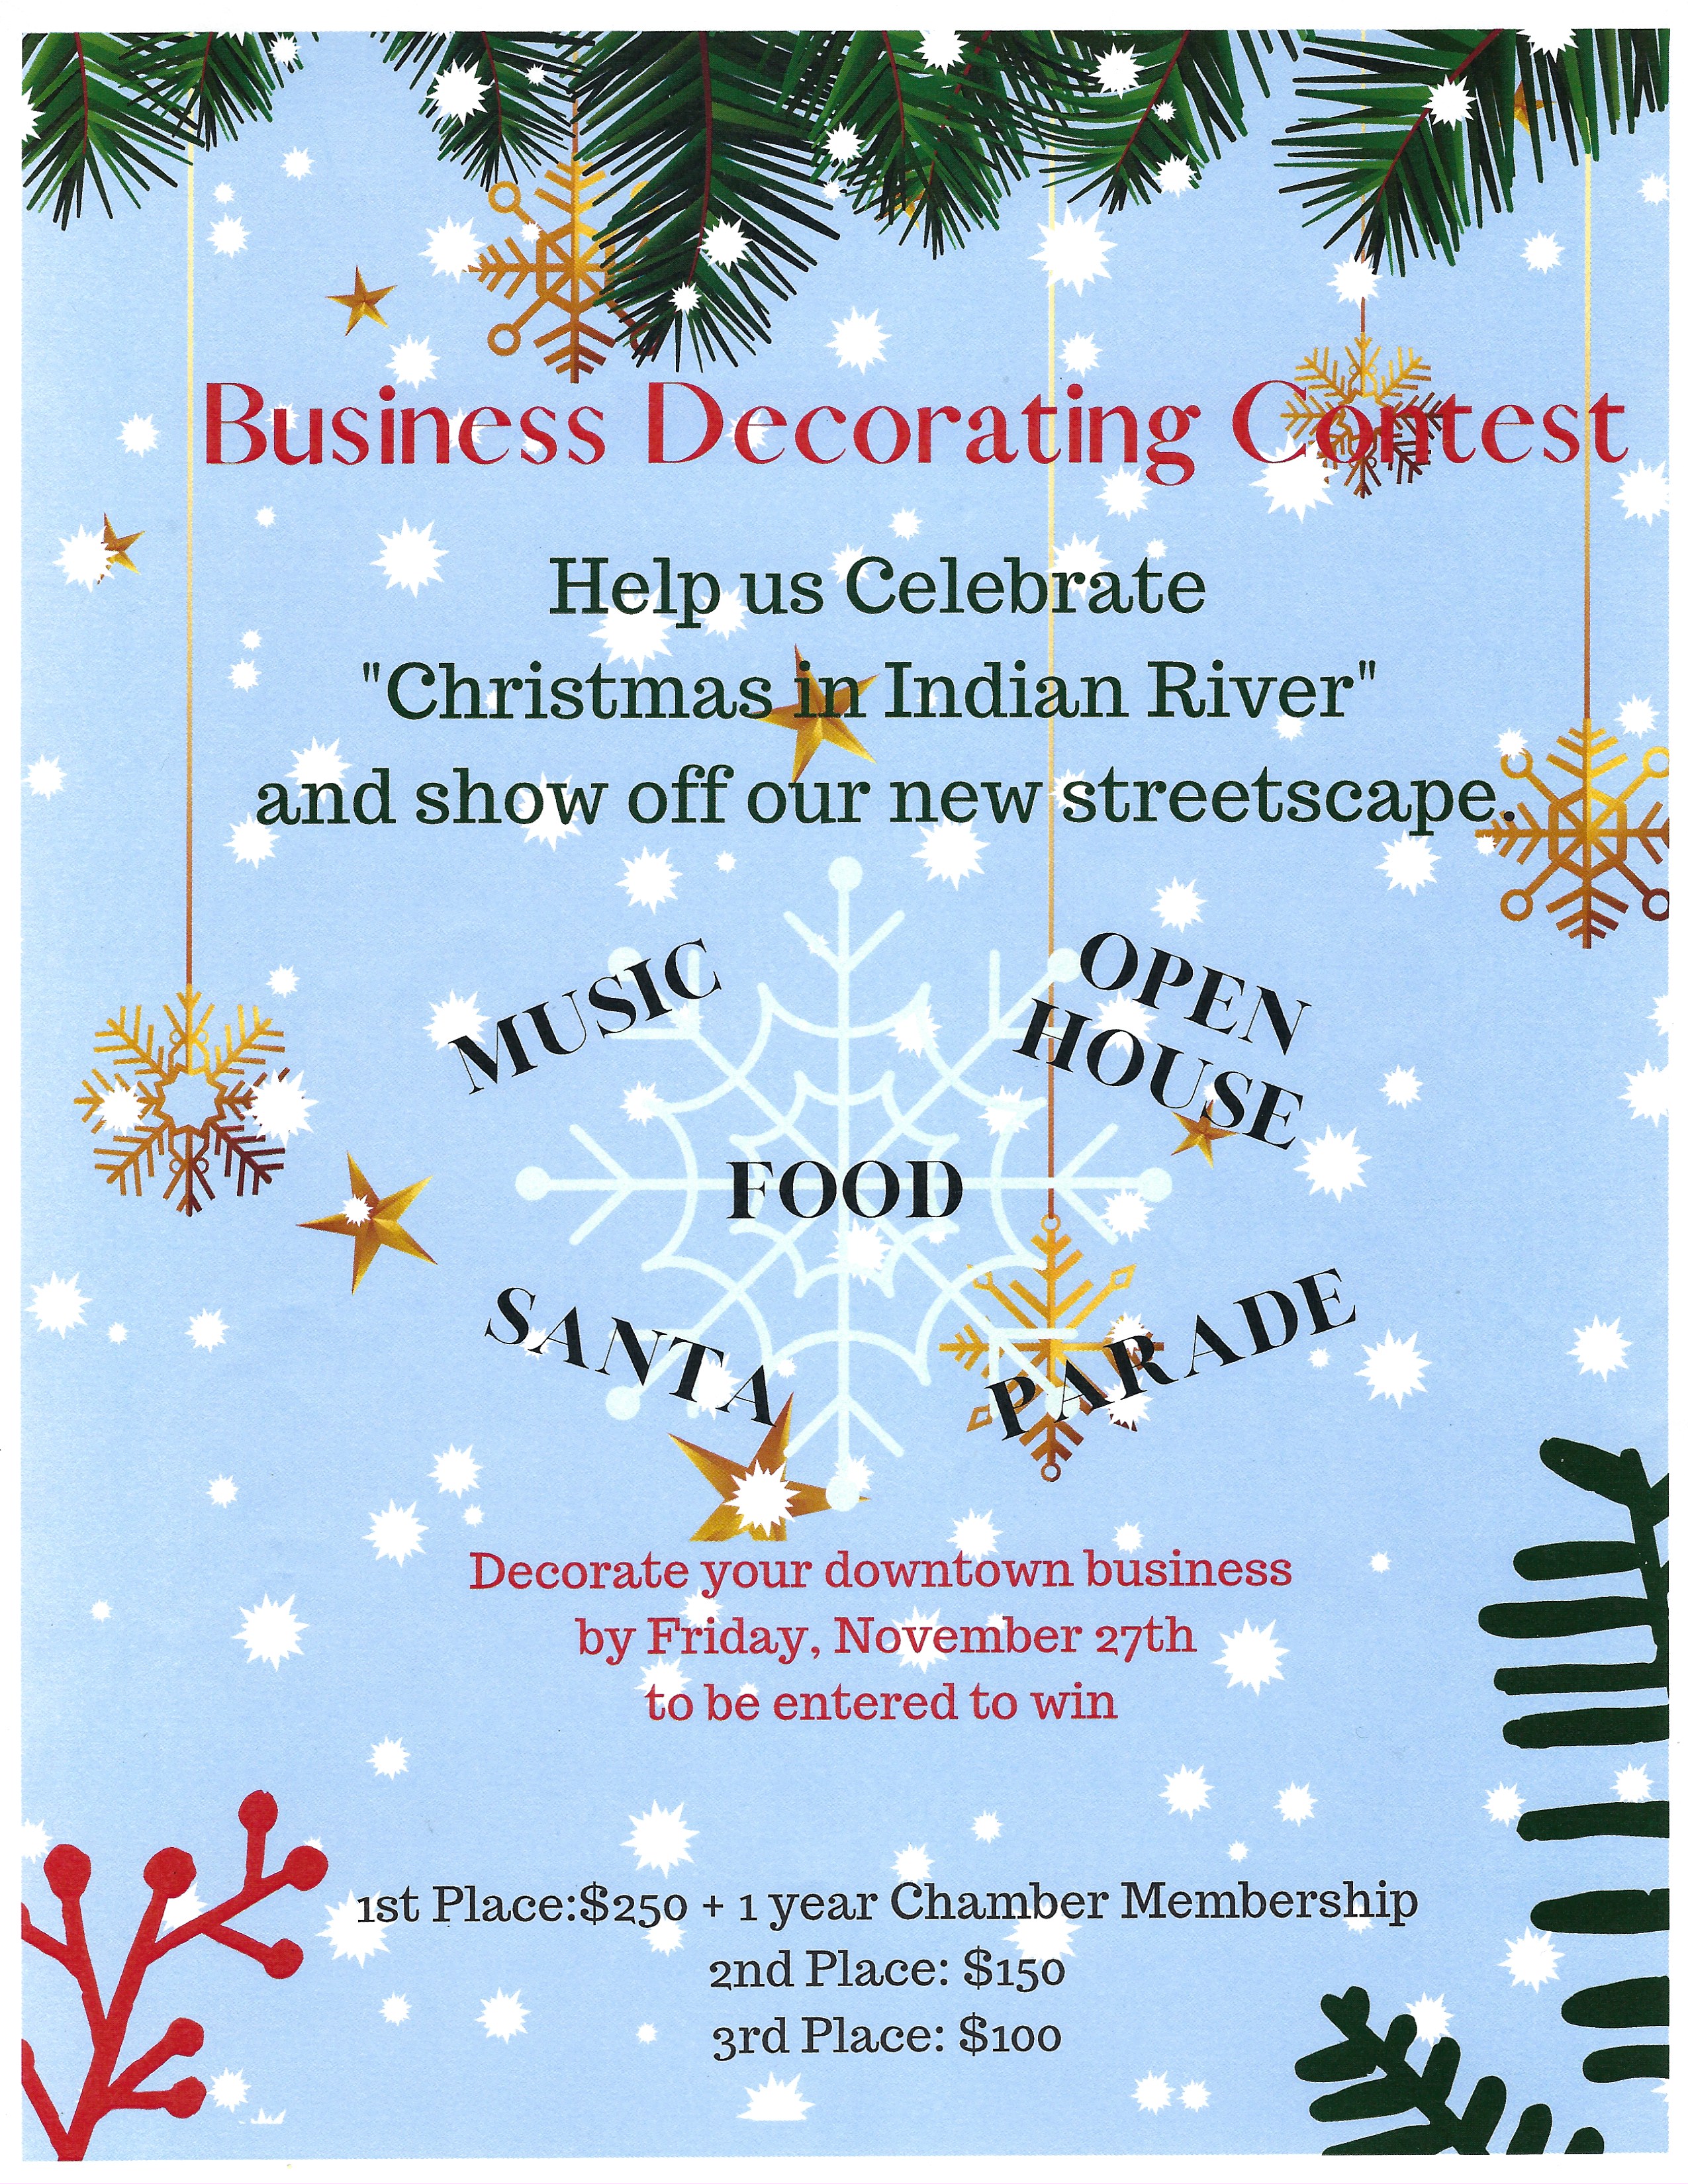 Downtown Indian River Businesses - Lets decorate!